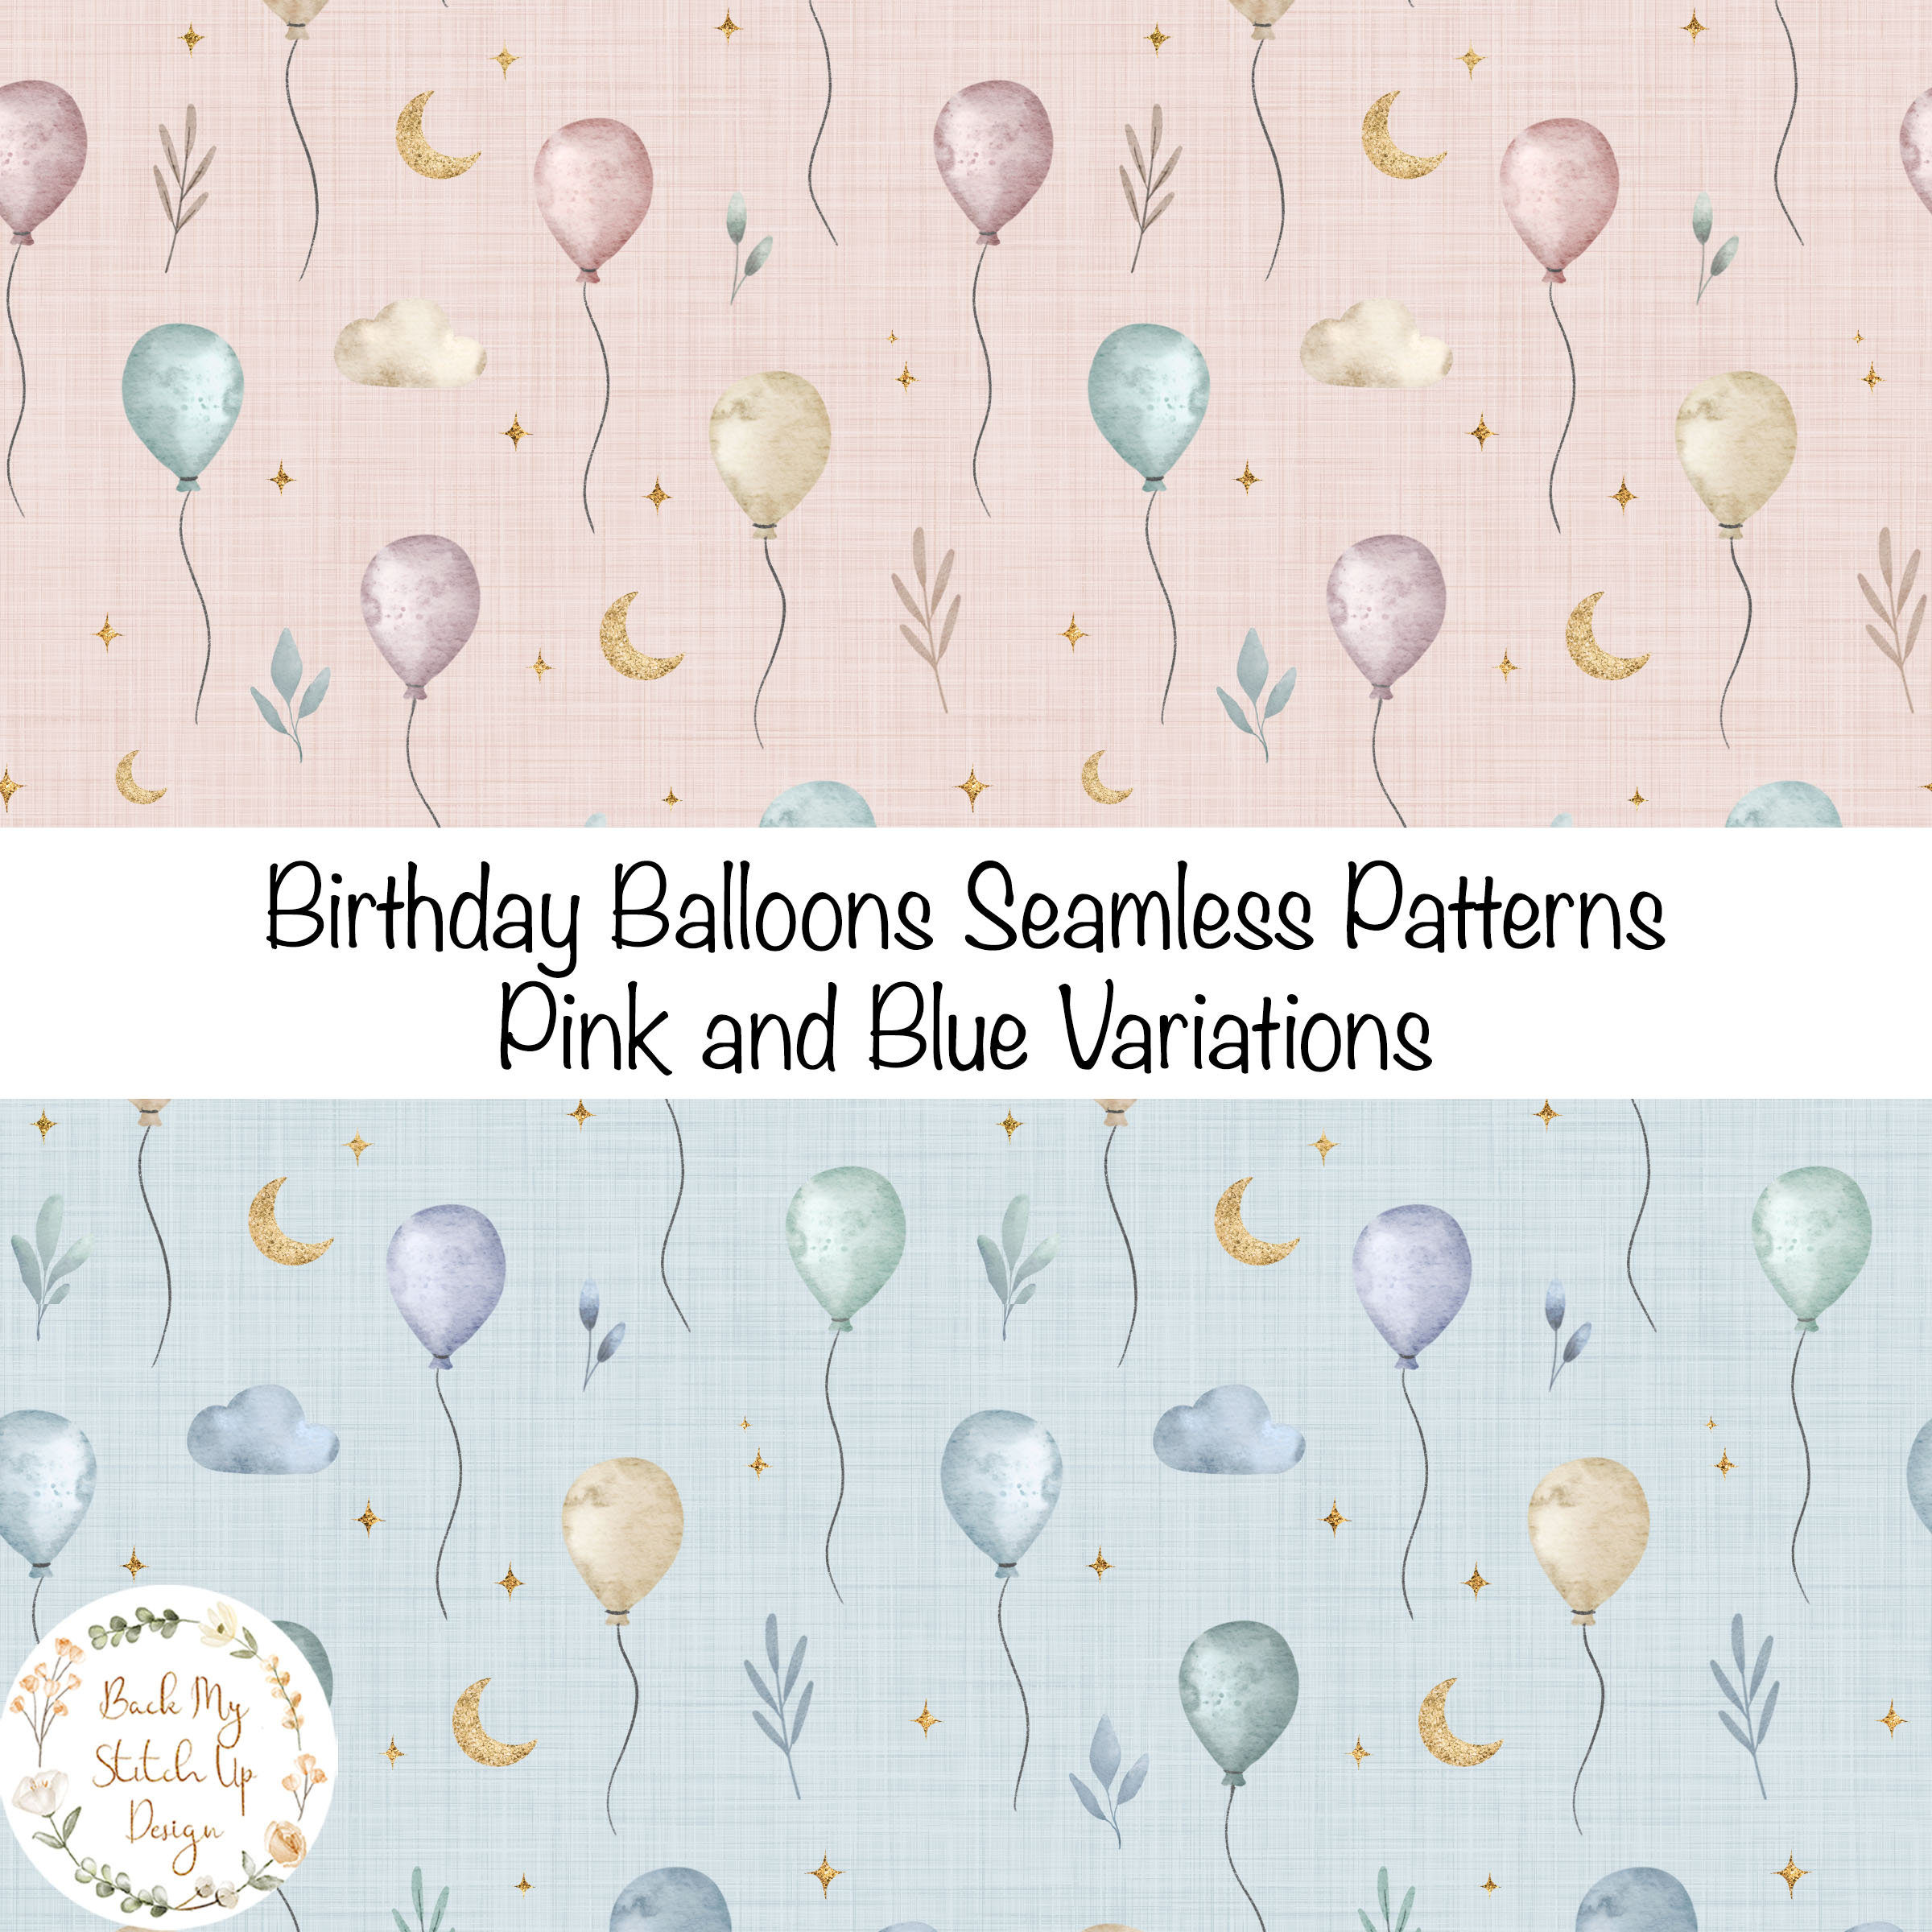 Birthday Balloon Seamless Pattern, Children's Fabric Design, Celebration  Party, Digital Download, Commercial Licence, Non-exclusive -  Finland